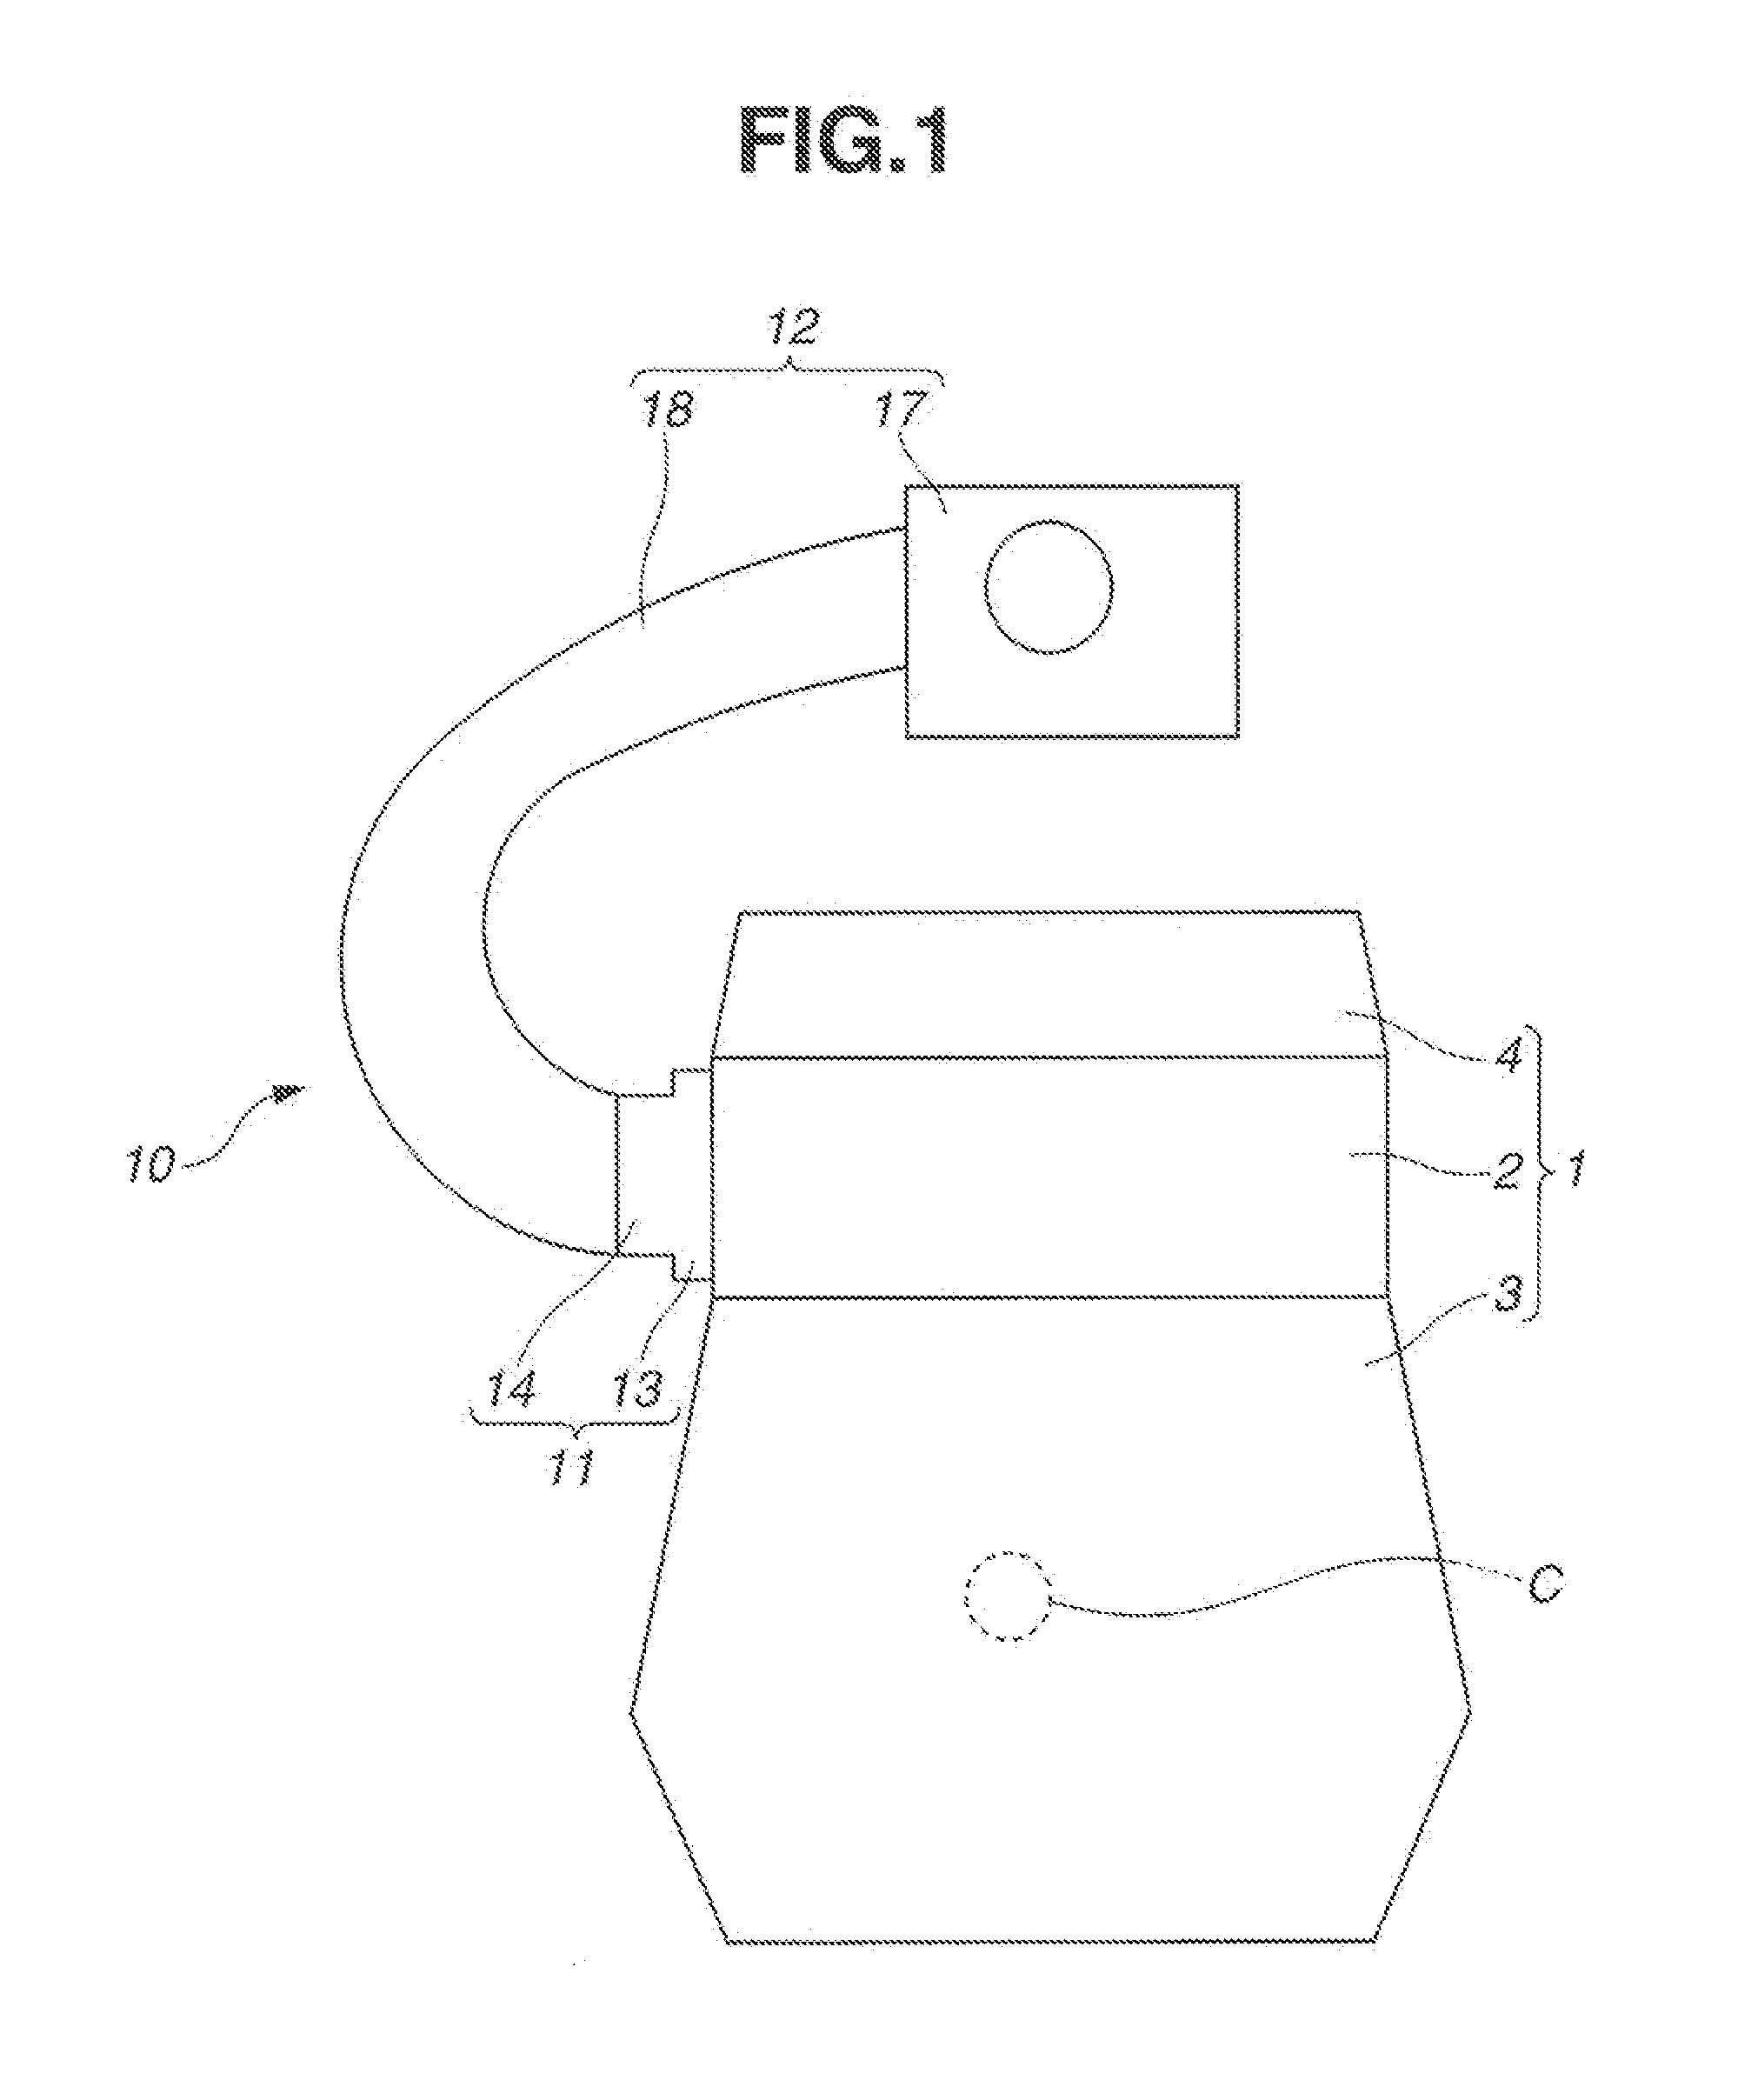 Intake manifold for internal combustion engine